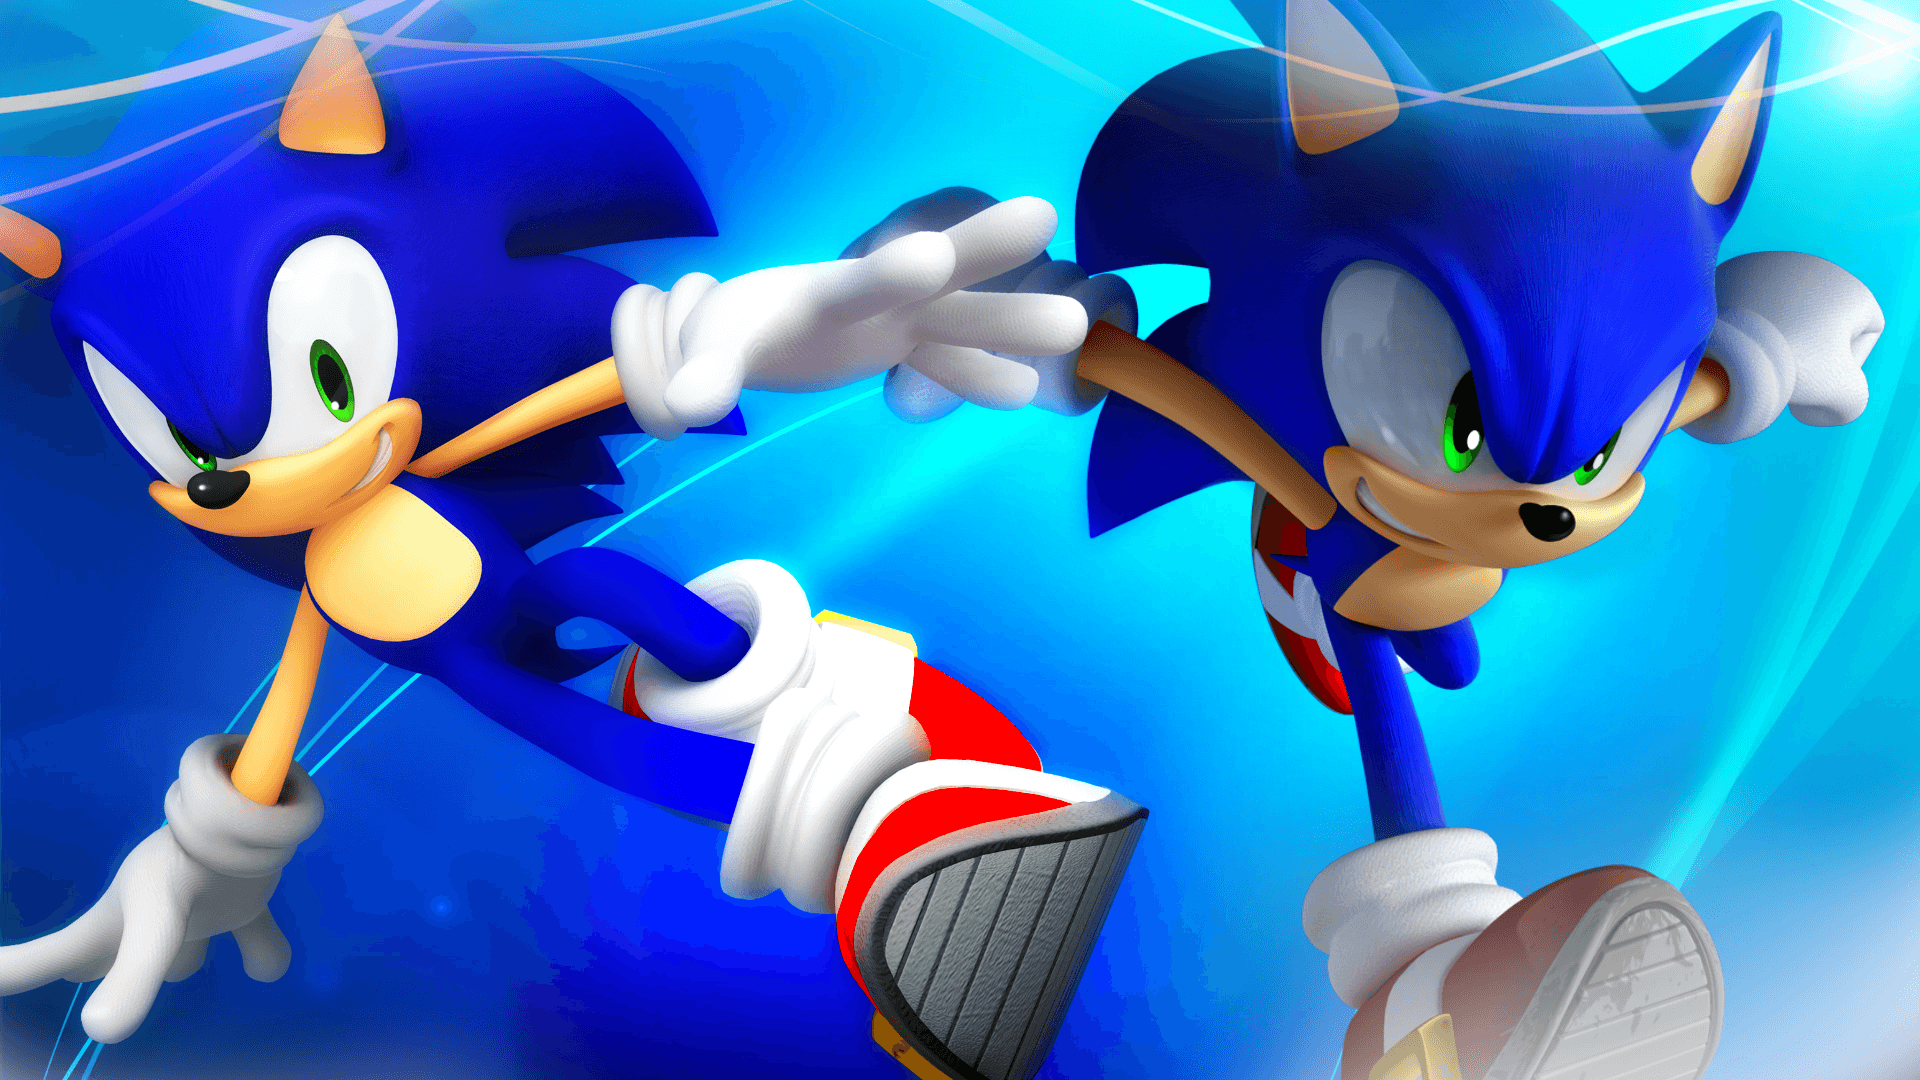 Sonic The Hedgehog Wallpapers 2016